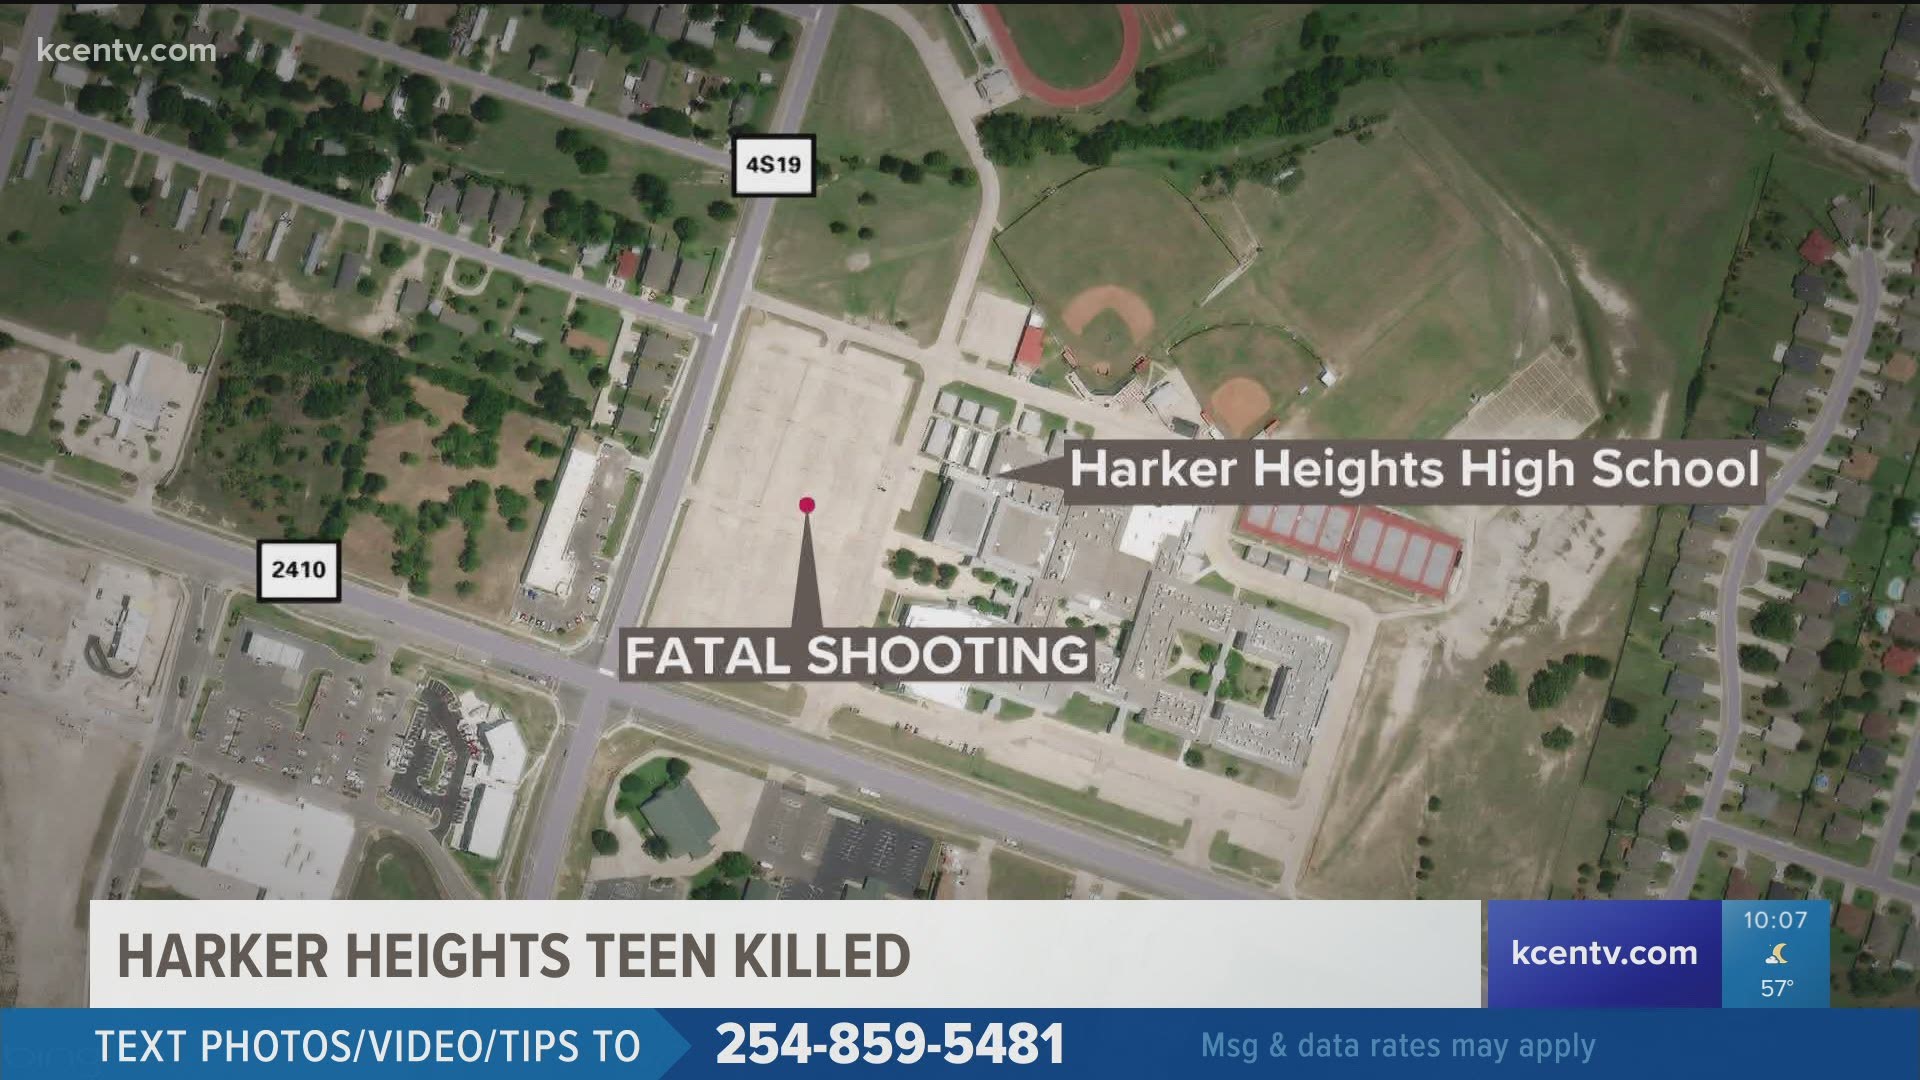 Police identified Quinton Ford, 19, as the victim of the shooting that stemmed from an argument in the high school parking lot.